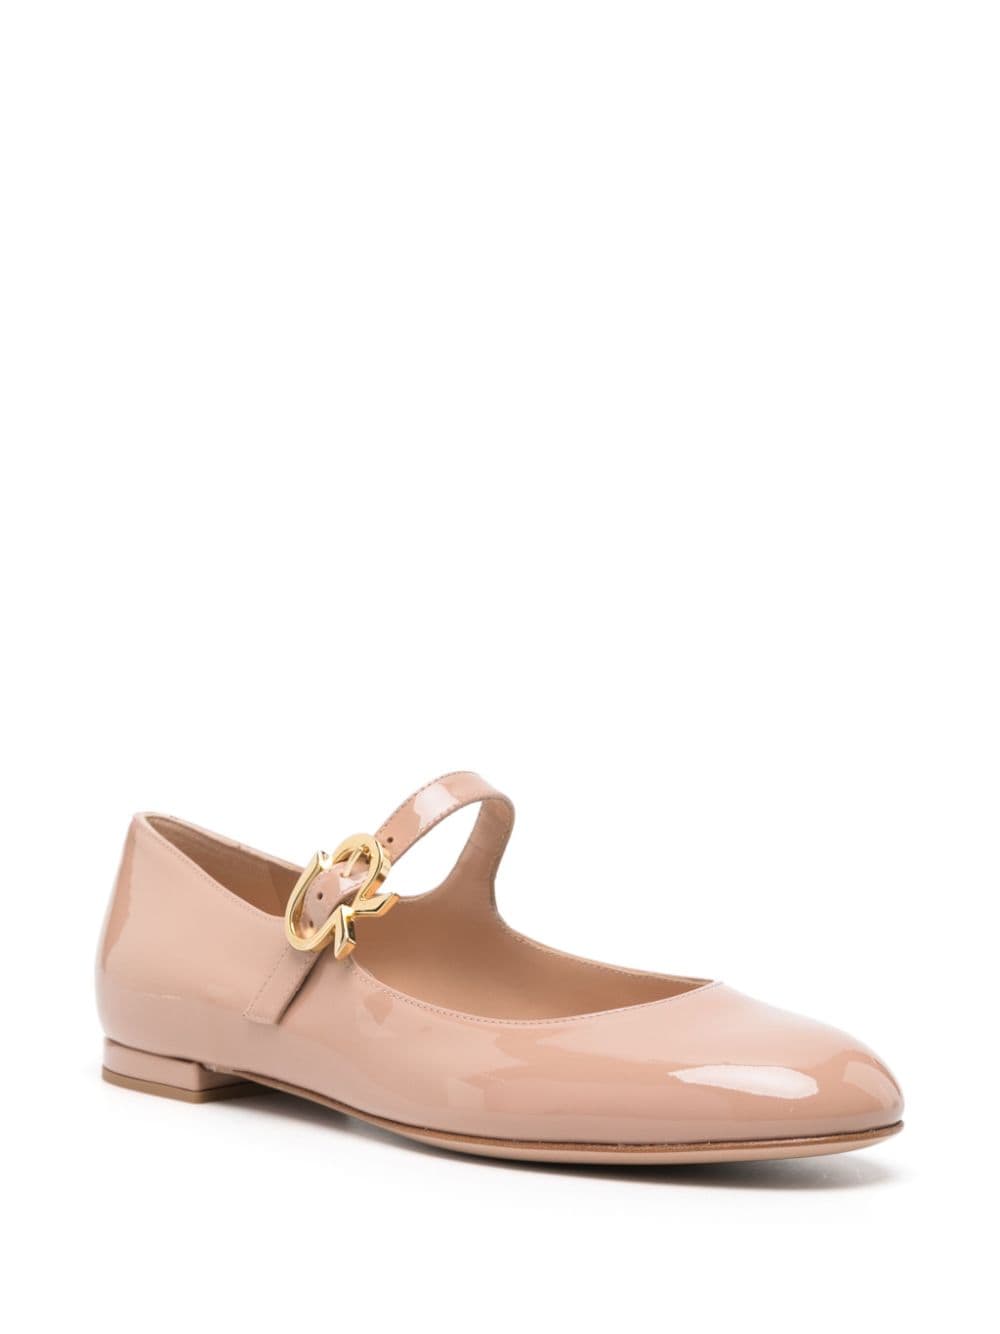 Gianvito Rossi Mary Ribbon 05 leather ballerina shoes - Beige